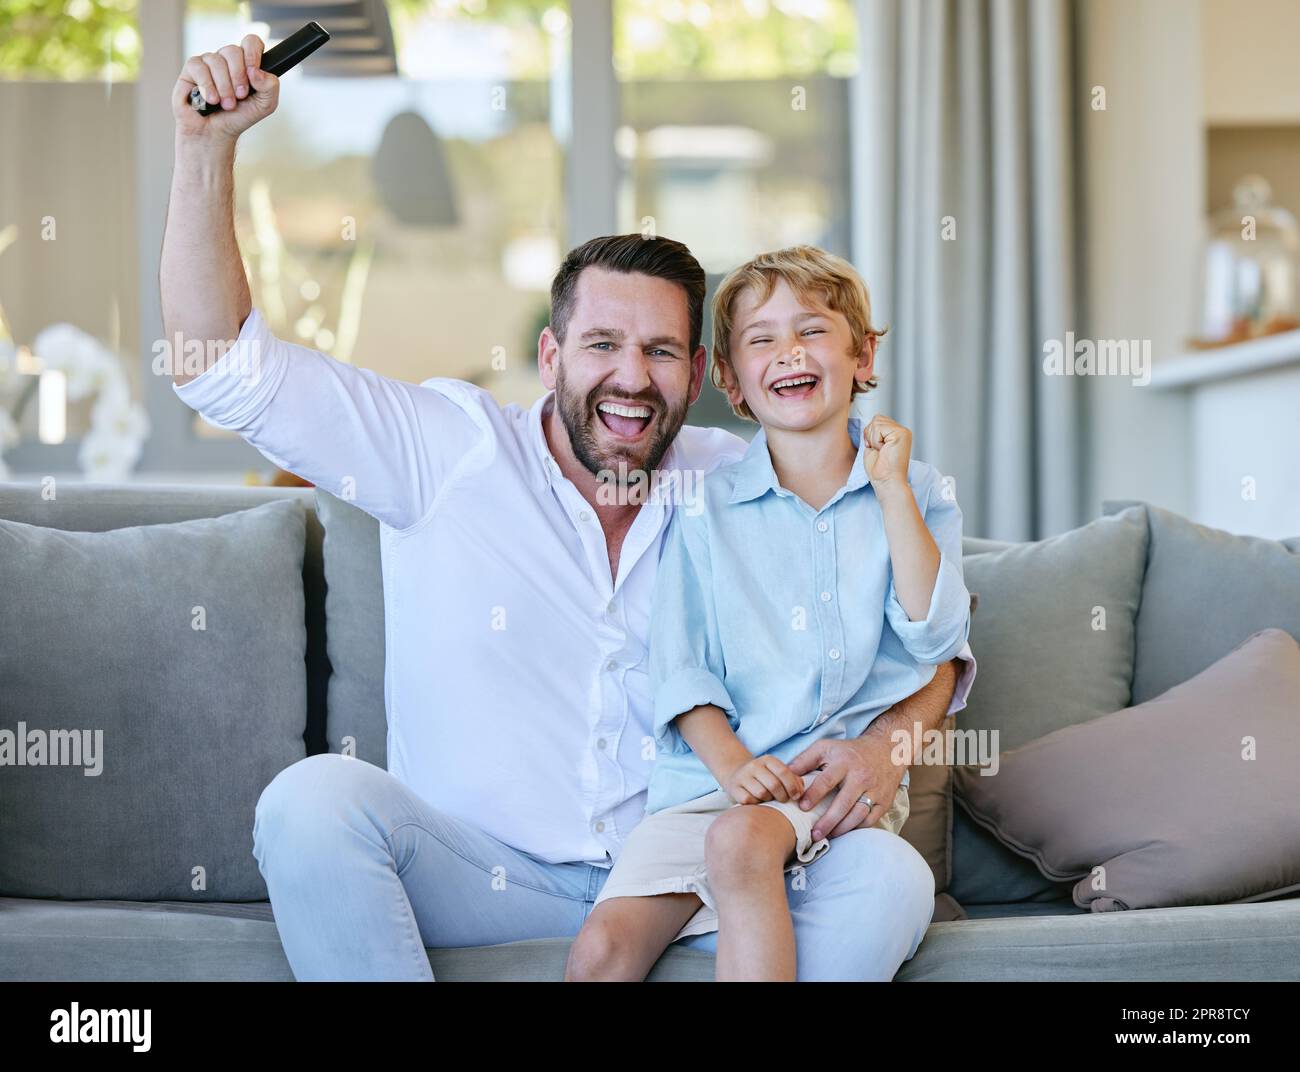 Cheering on their favourite team. Cropped portrait of a handsome mature man and his son cheering while watching TV in the living room at home. Stock Photo